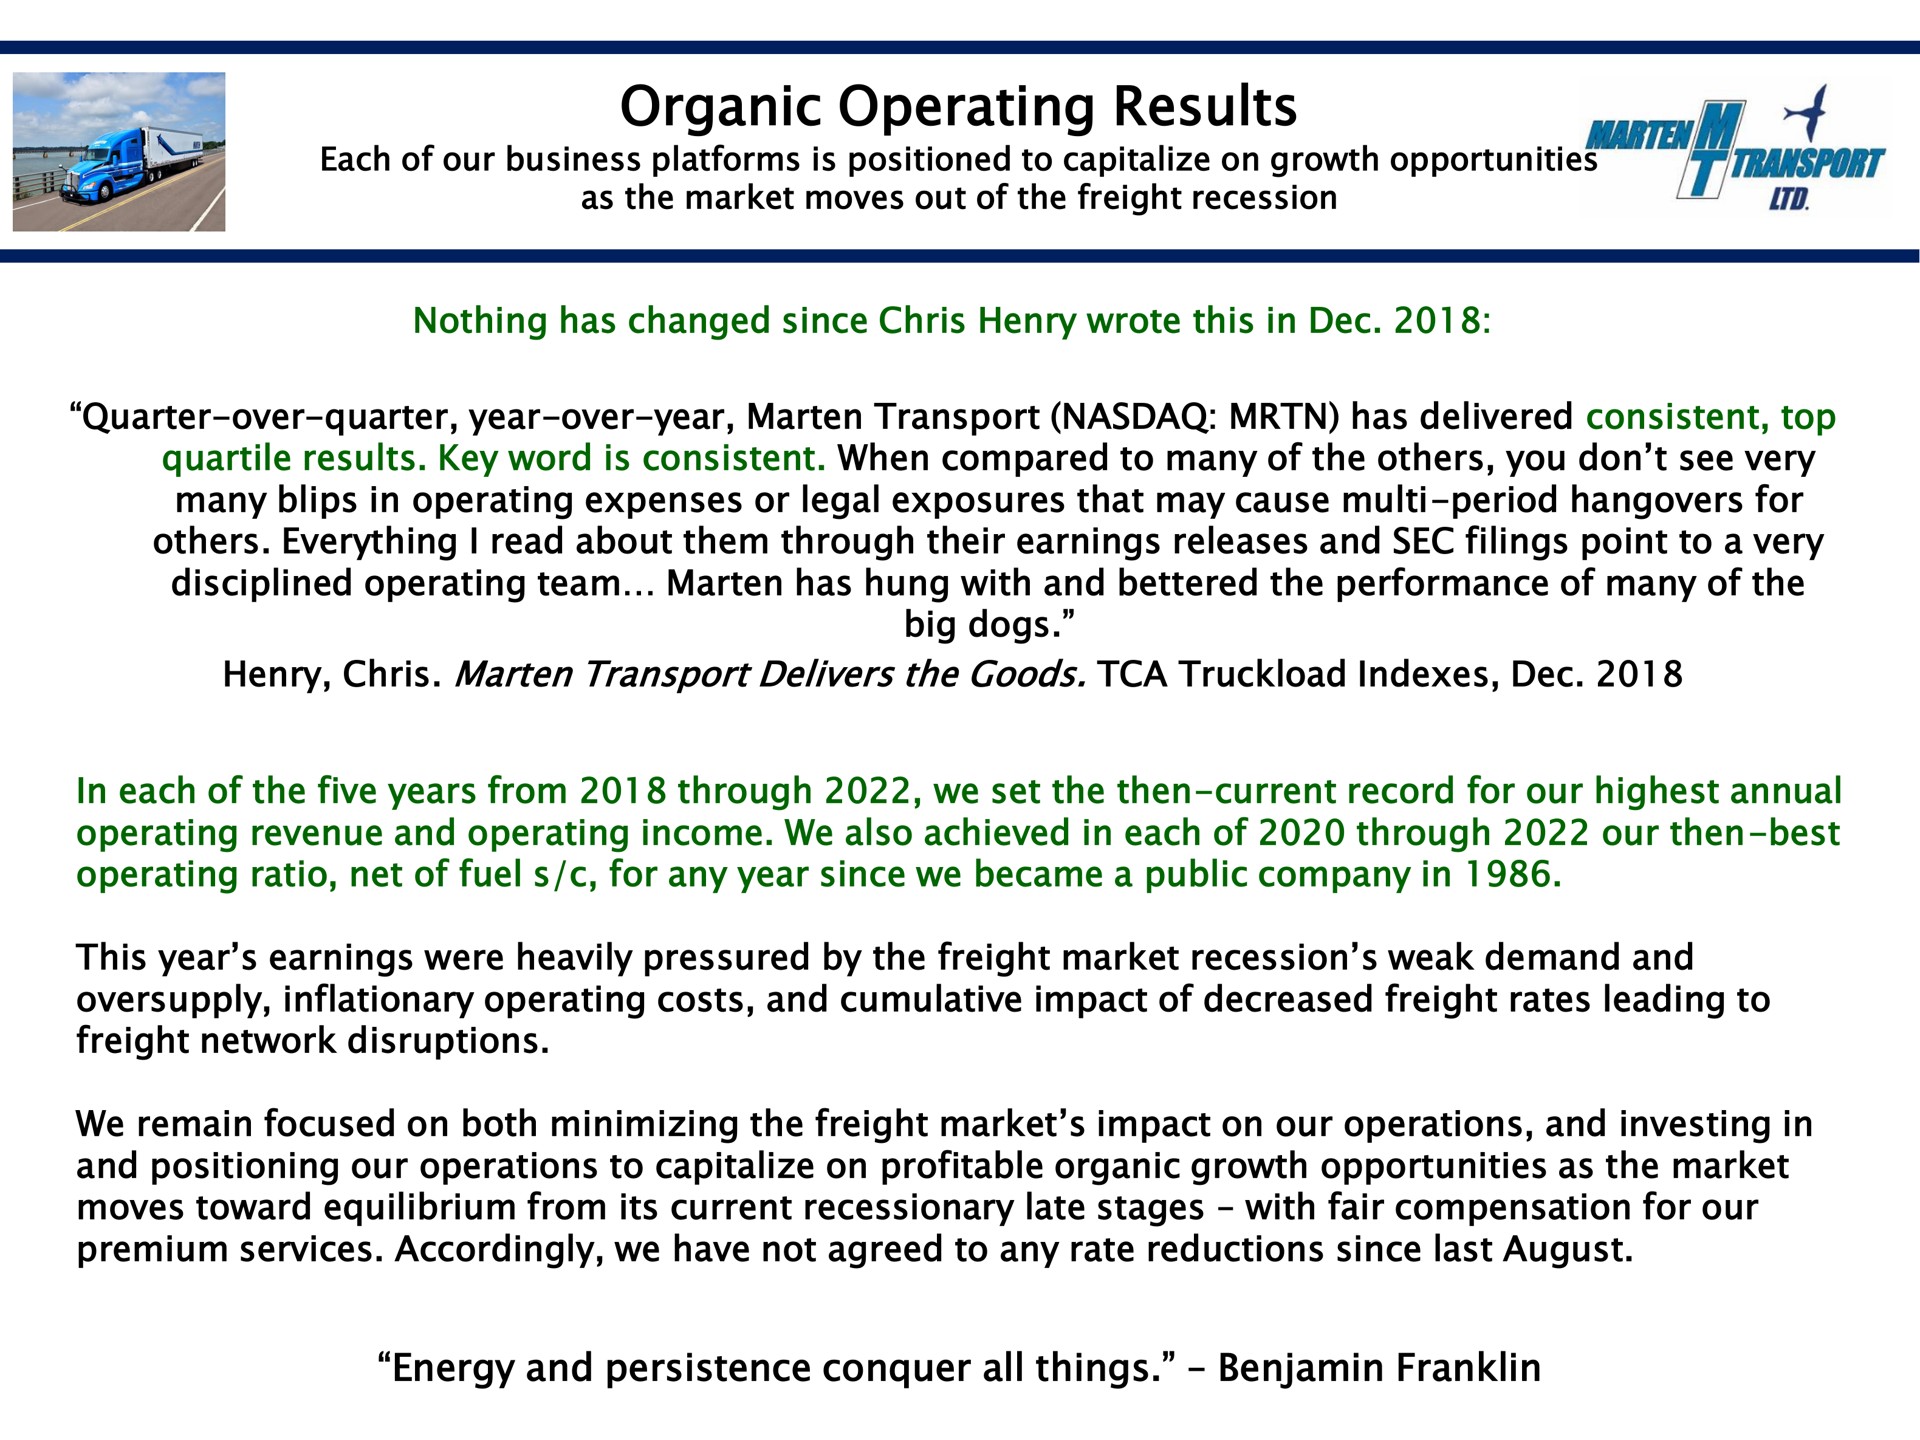 organic operating results nothing has changed since henry wrote this in quarter over quarter year over year marten transport has delivered consistent top quartile results key word is consistent when compared to many of the you don see very many blips in operating expenses or legal exposures that may cause period for everything i read about them through their earnings releases and sec filings point to a very disciplined operating team marten has hung with and bettered the performance of many of the big dogs henry marten transport delivers the goods truckload indexes in each of the five years from through we set the then current record for our highest annual operating revenue and operating income we also achieved in each of through our then best operating ratio net of fuel for any year since we became a public company in this year earnings were heavily pressured by the freight market recession weak demand and oversupply inflationary operating costs and cumulative impact of decreased freight rates leading to freight network disruptions we remain focused on both minimizing the freight market impact on our operations and investing in and positioning our operations to capitalize on profitable organic growth opportunities as the market moves toward equilibrium from its current recessionary late stages with fair compensation for our premium services accordingly we have not agreed to any rate reductions since last august energy and persistence conquer all things benjamin franklin | Marten Transport